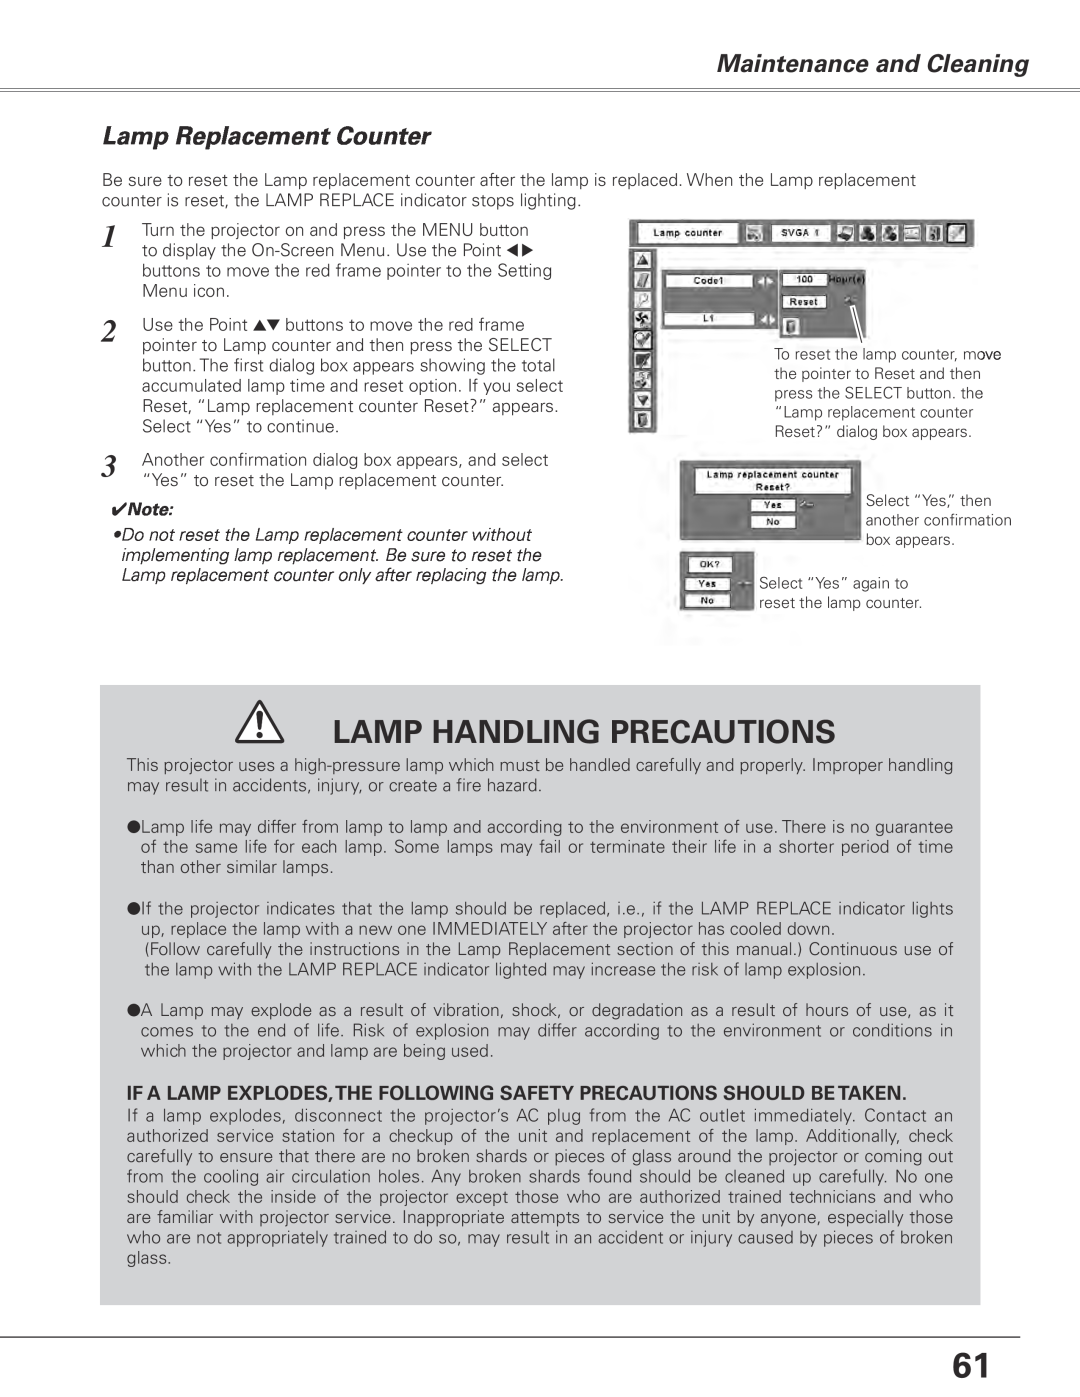 Sanyo PLC-XE50 owner manual Maintenance and Cleaning Lamp Replacement Counter, Lamp Handling Precautions 